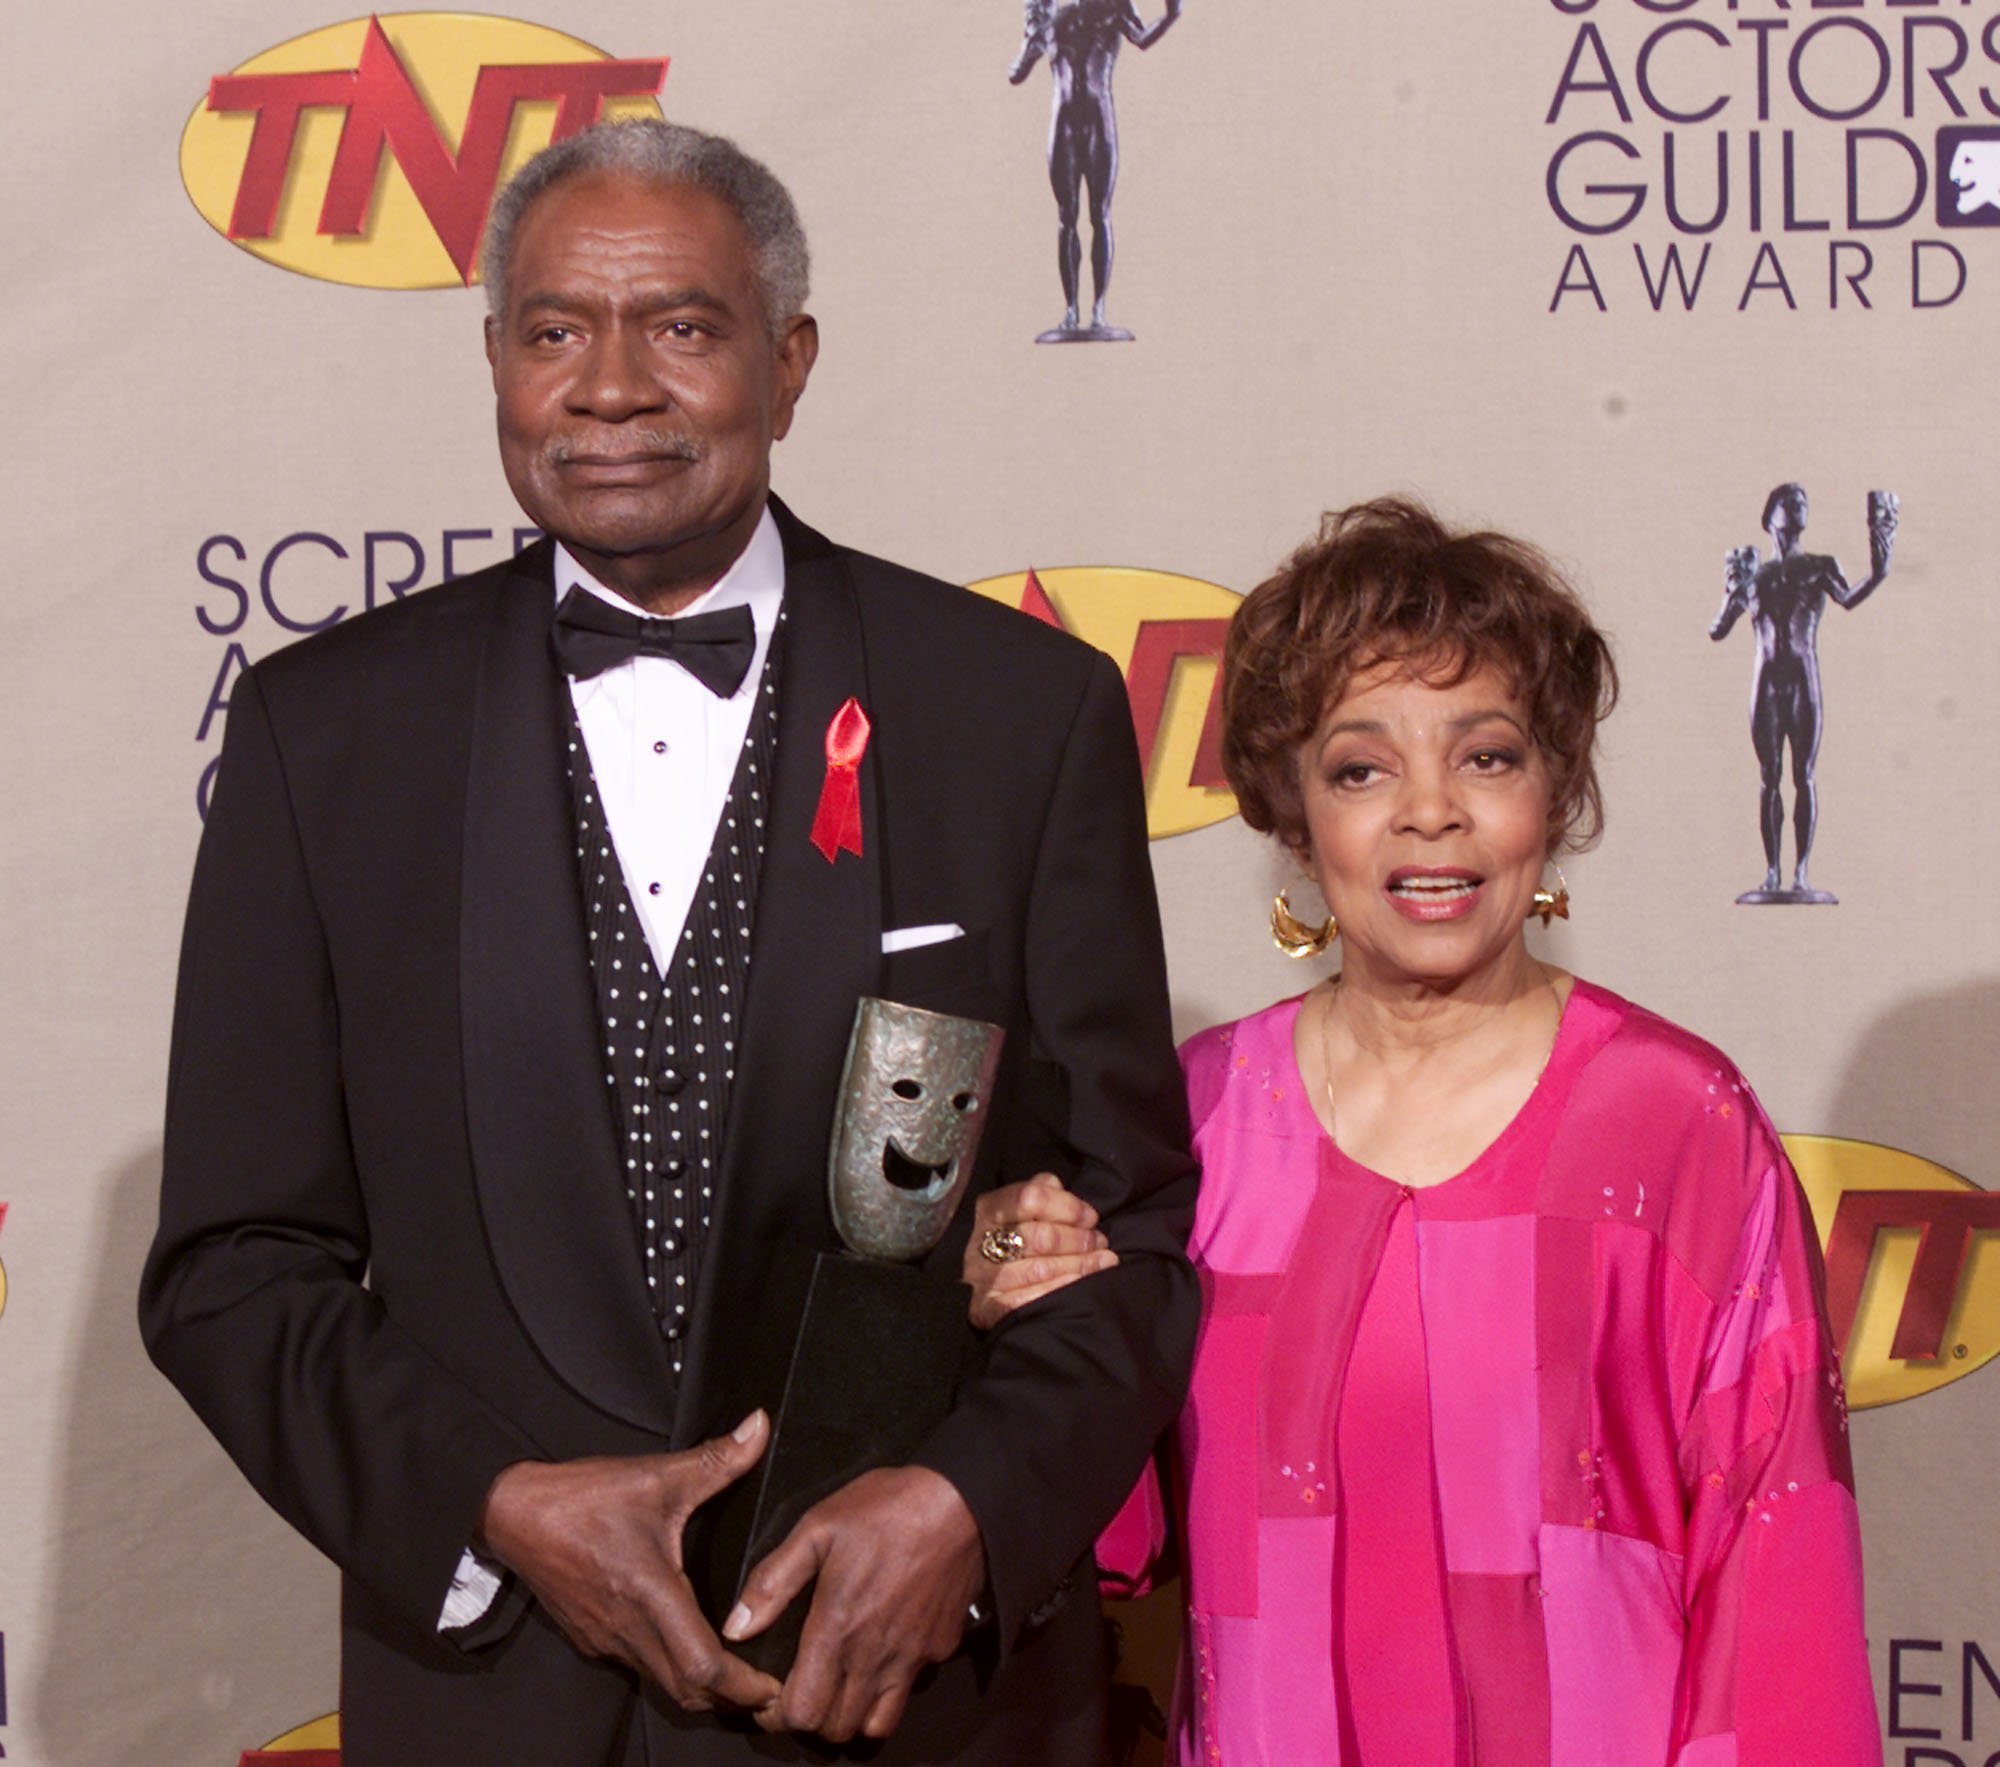 Ossie Davis and Ruby Dee backstage at the 7th Annual Screen Actors Guild Awards. March, 2001. | Photo: GettyImages